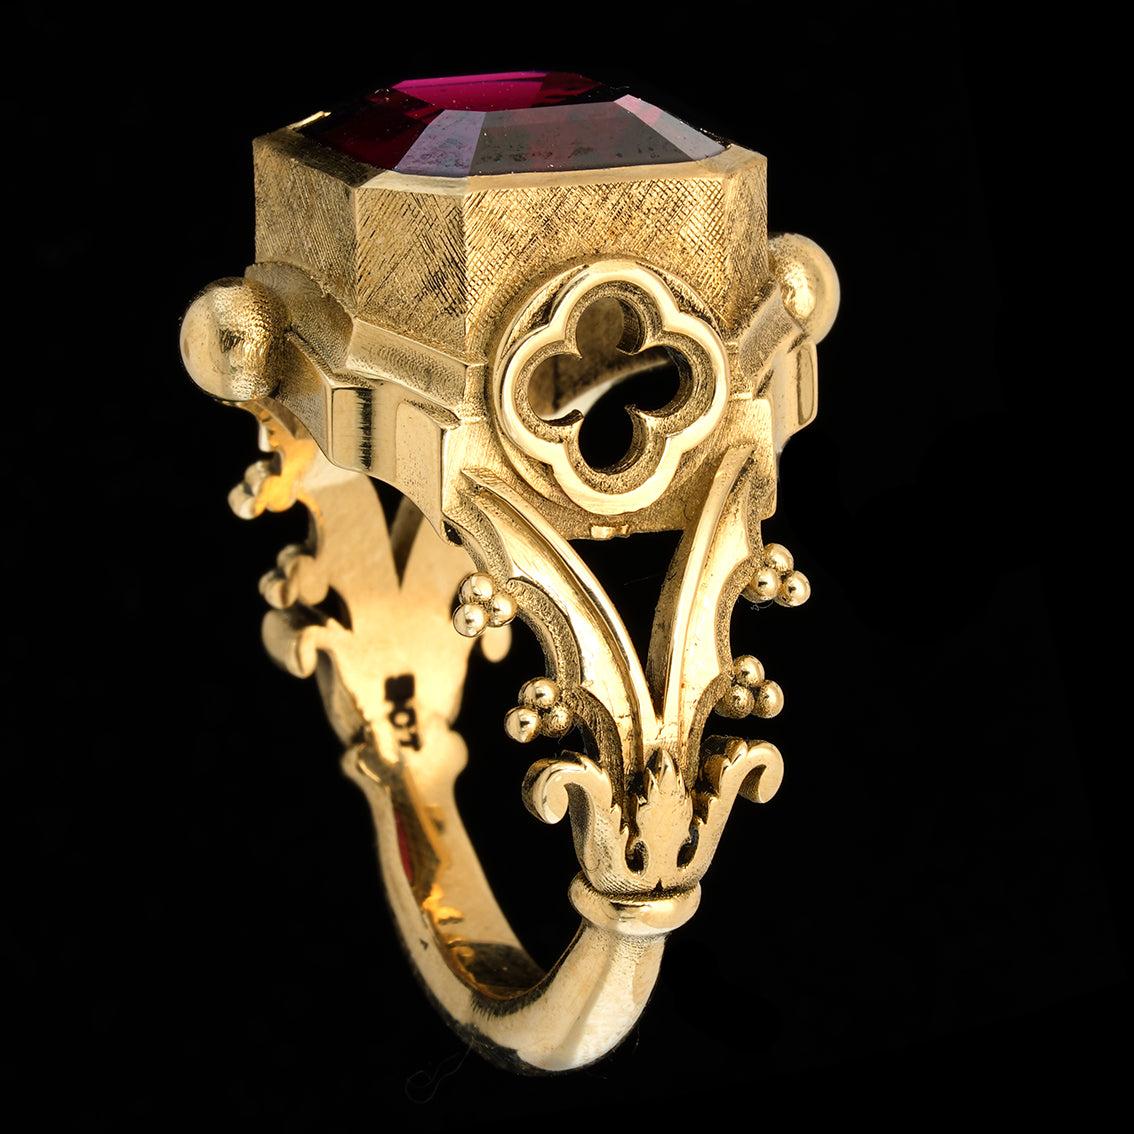 PALAZZO DUCALE GOTHIC GARNET SIGNET RING